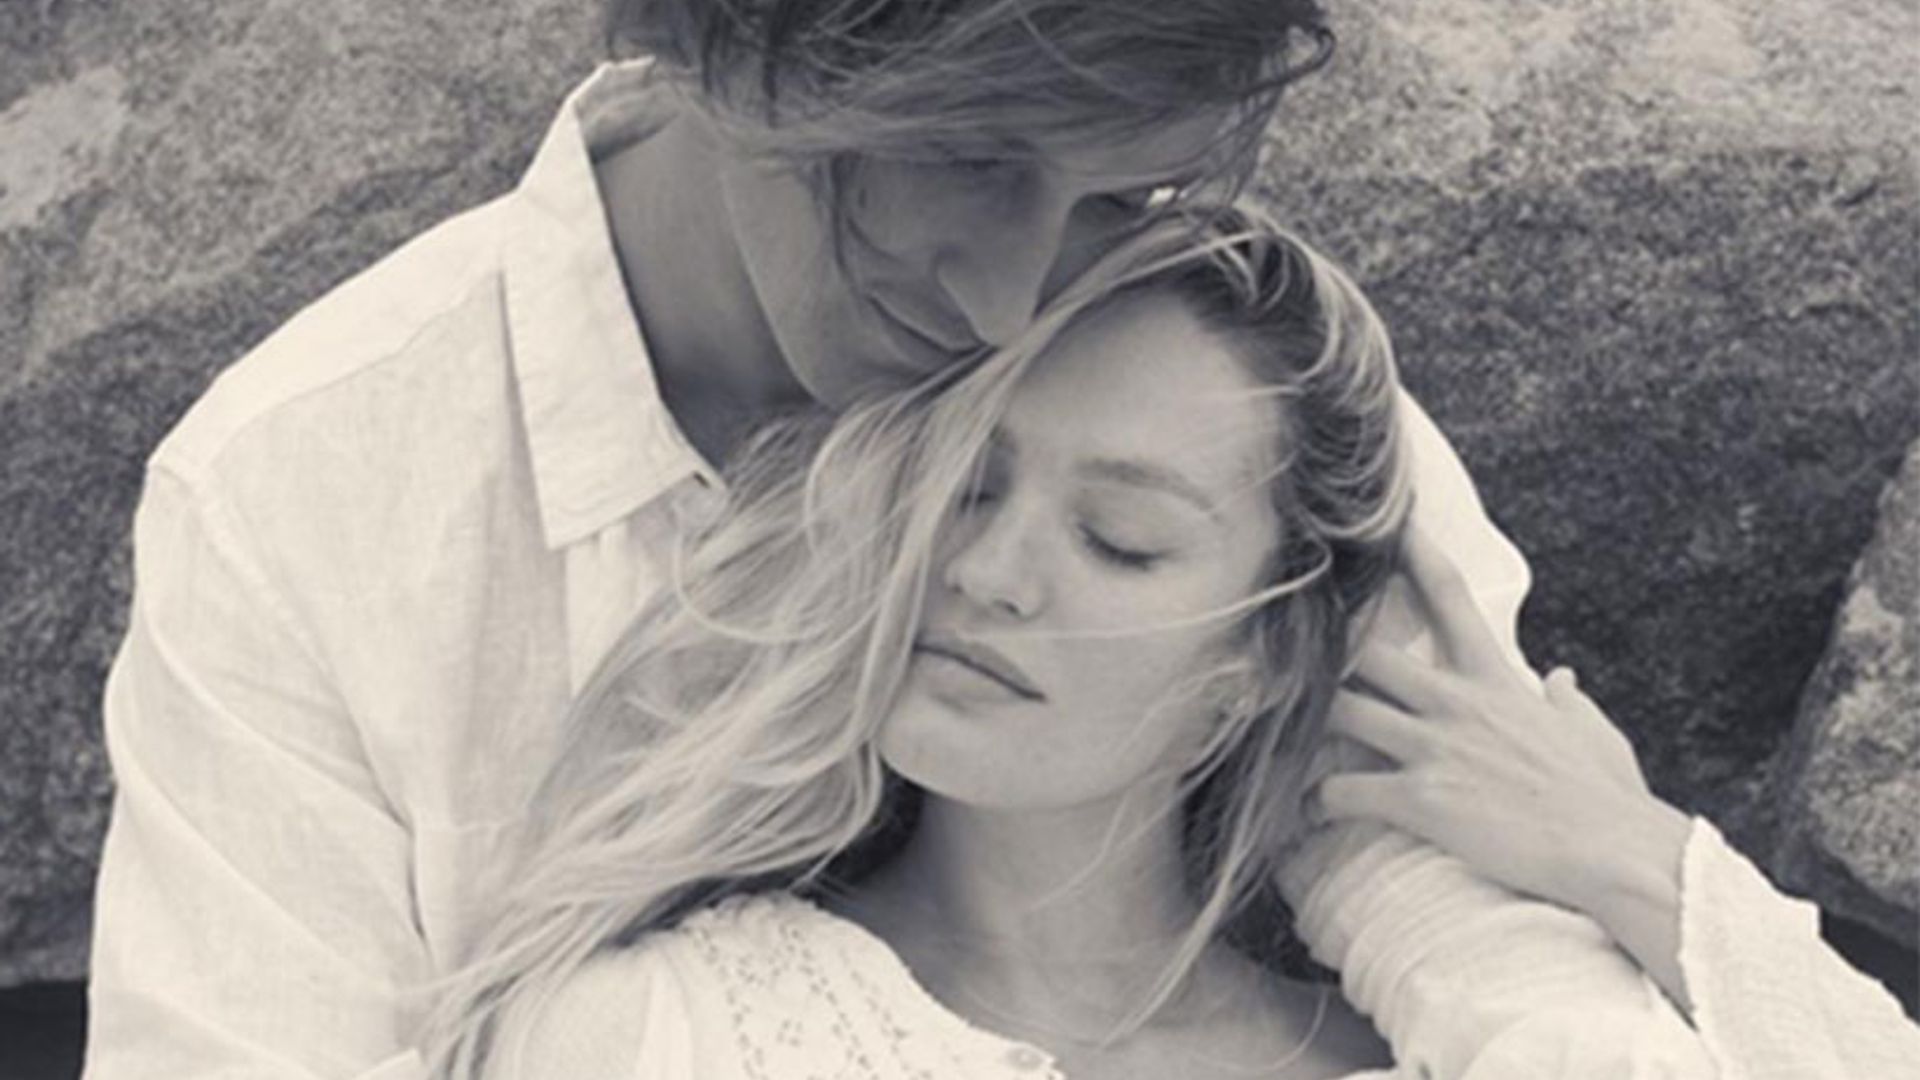 Candice Swanepoel welcomes first child with fiancé Hermann Nicoli